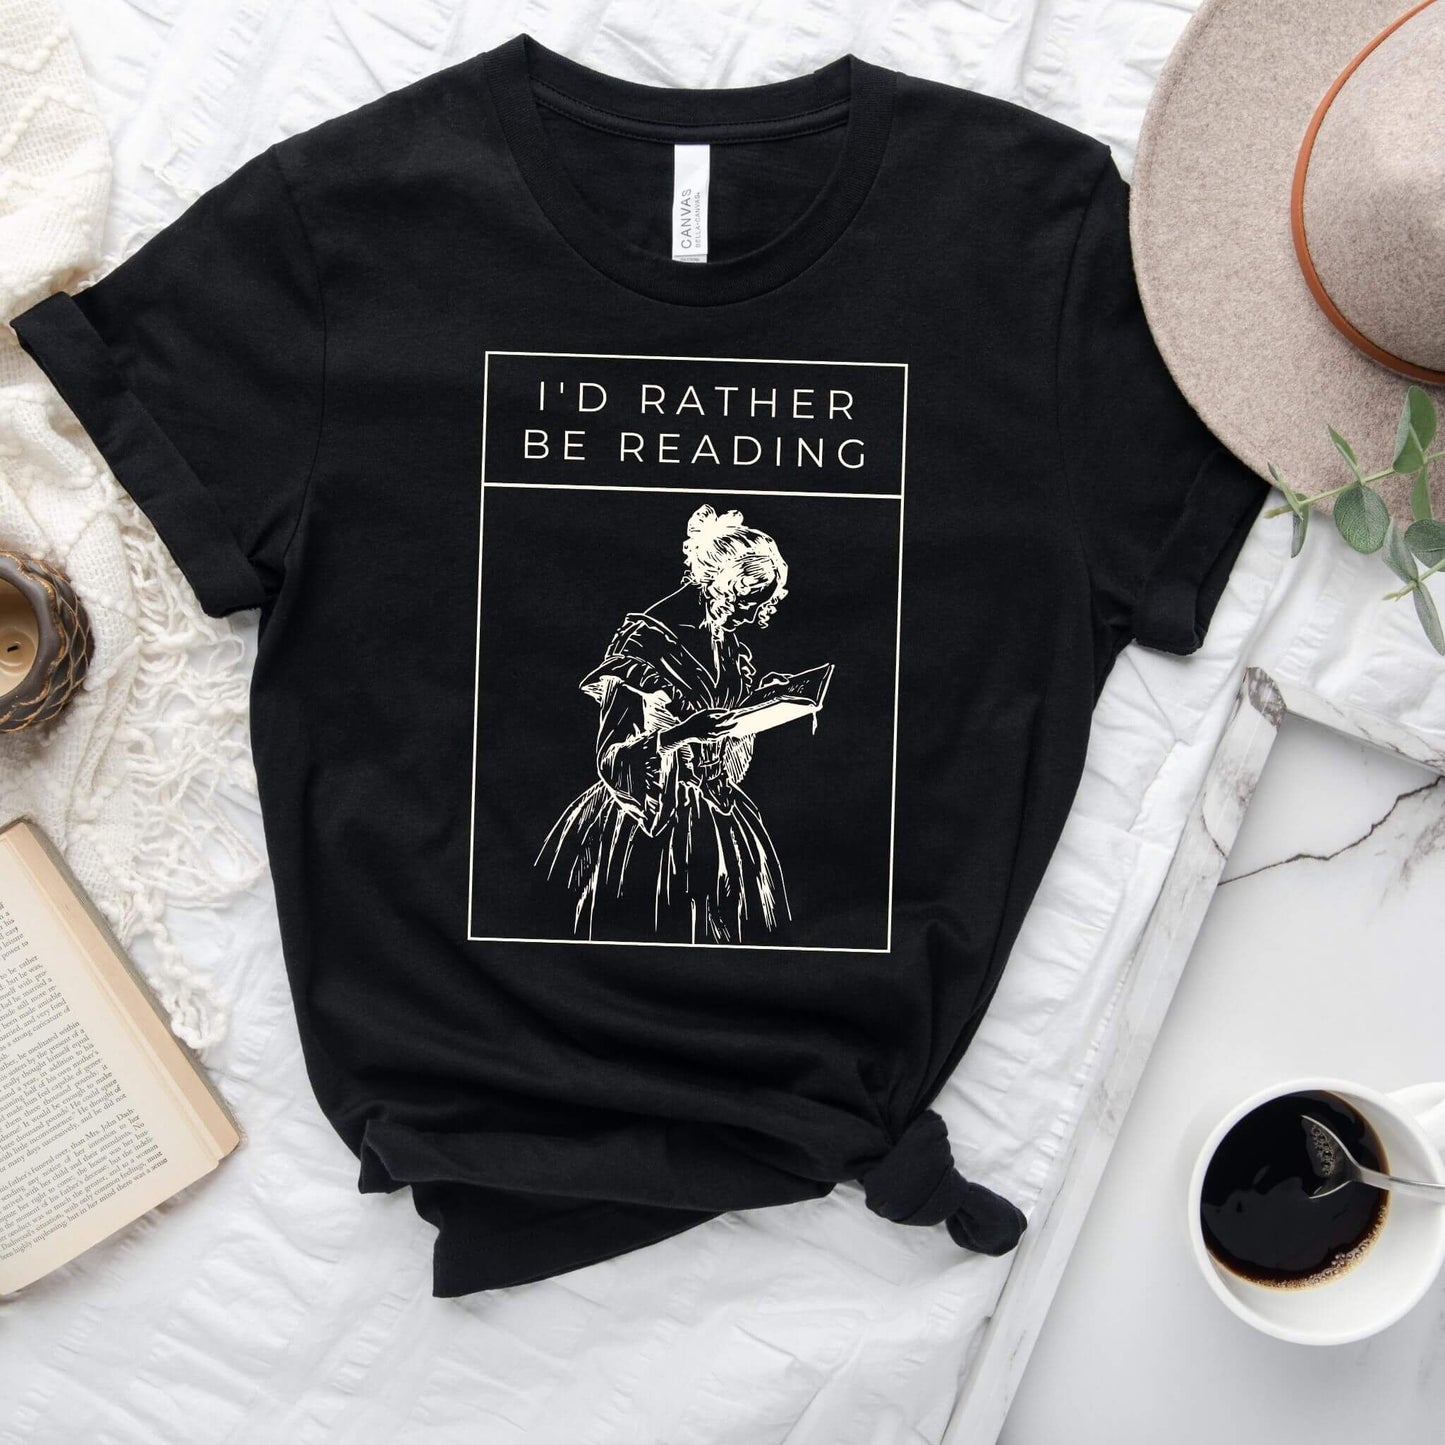 I'd Rather Be Reading - Funny Bookish T-Shirt